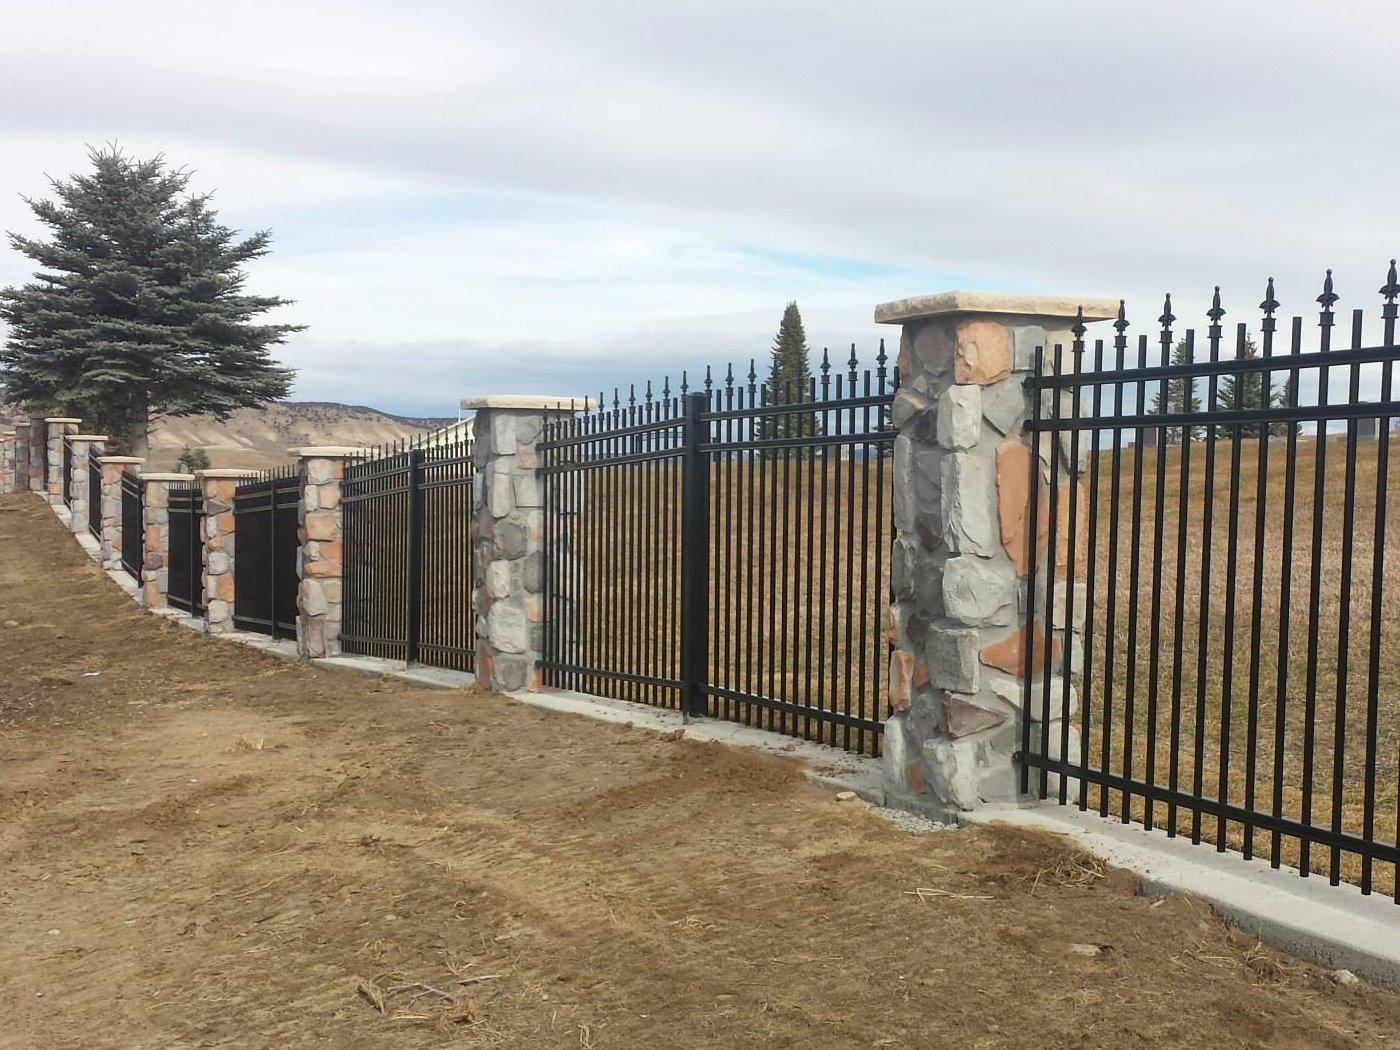 Photo of decorative residential fence made of aluminum with stone pillars.